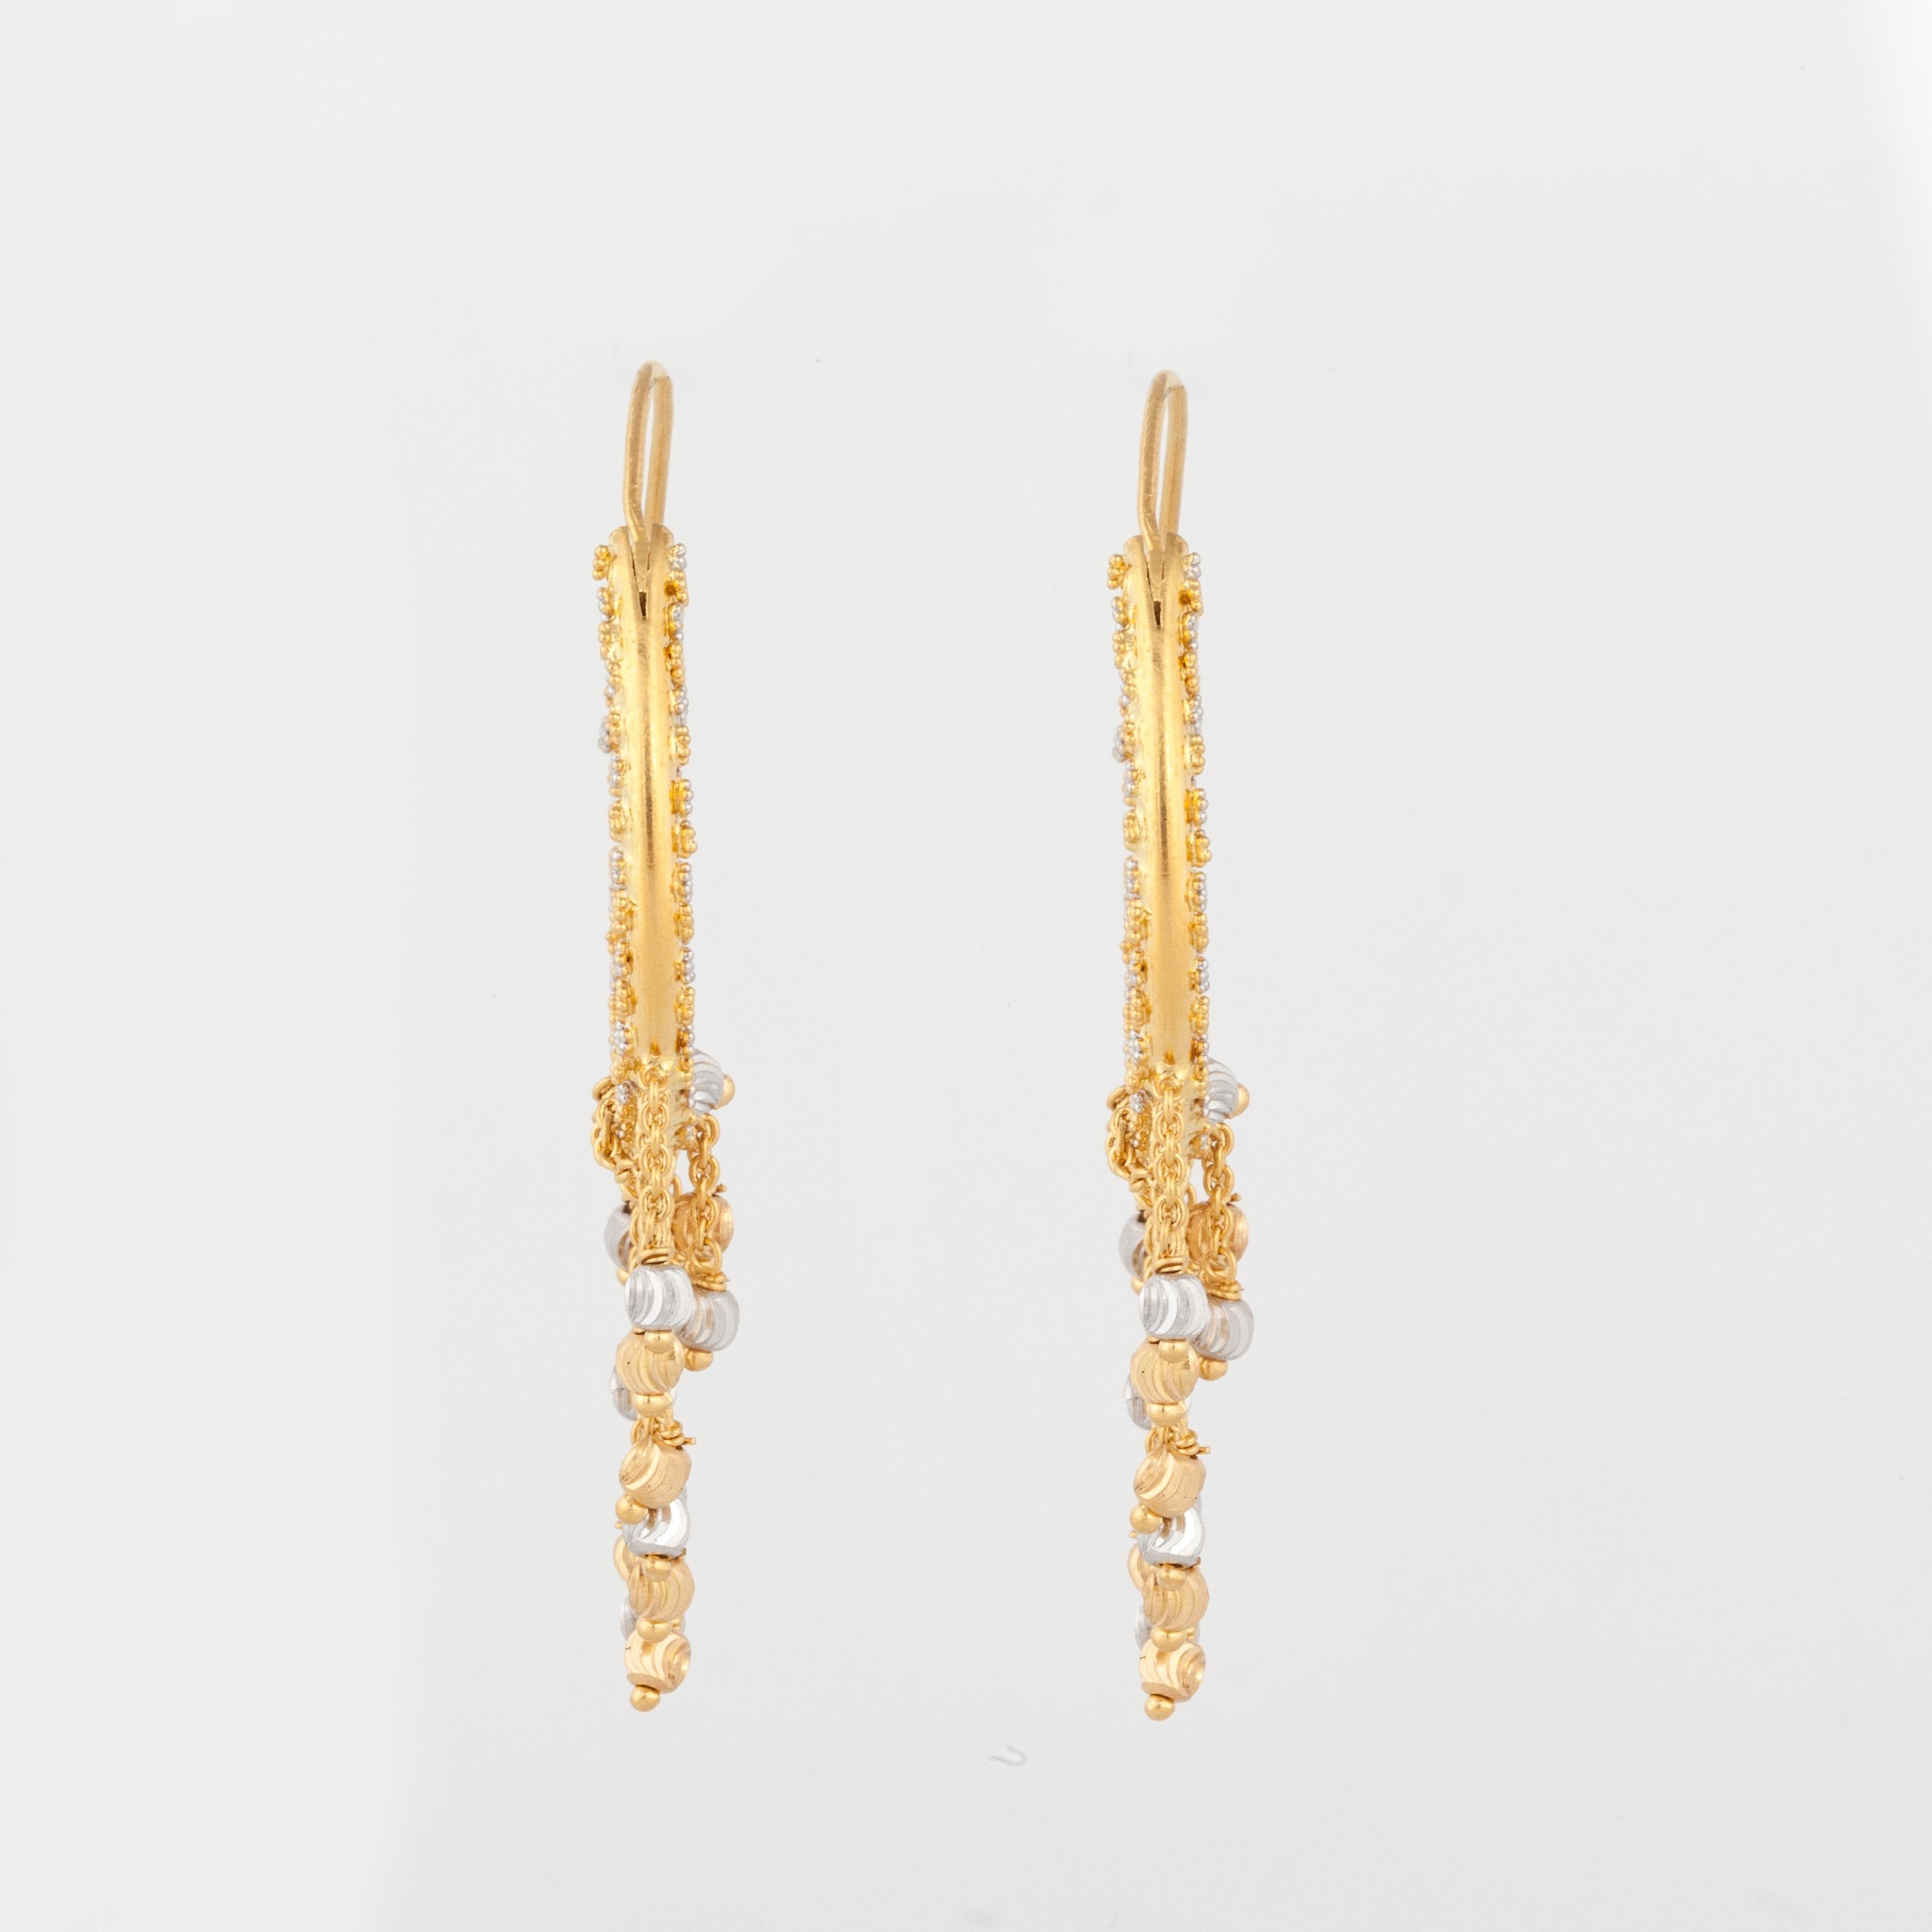 Hoop earrings which are crafted in yellow and white 22K gold.  There are chains dangling from the bottom with small balls attached at the end of each chain.  Etruscan work along each outside edge.  Measure 2-1/8